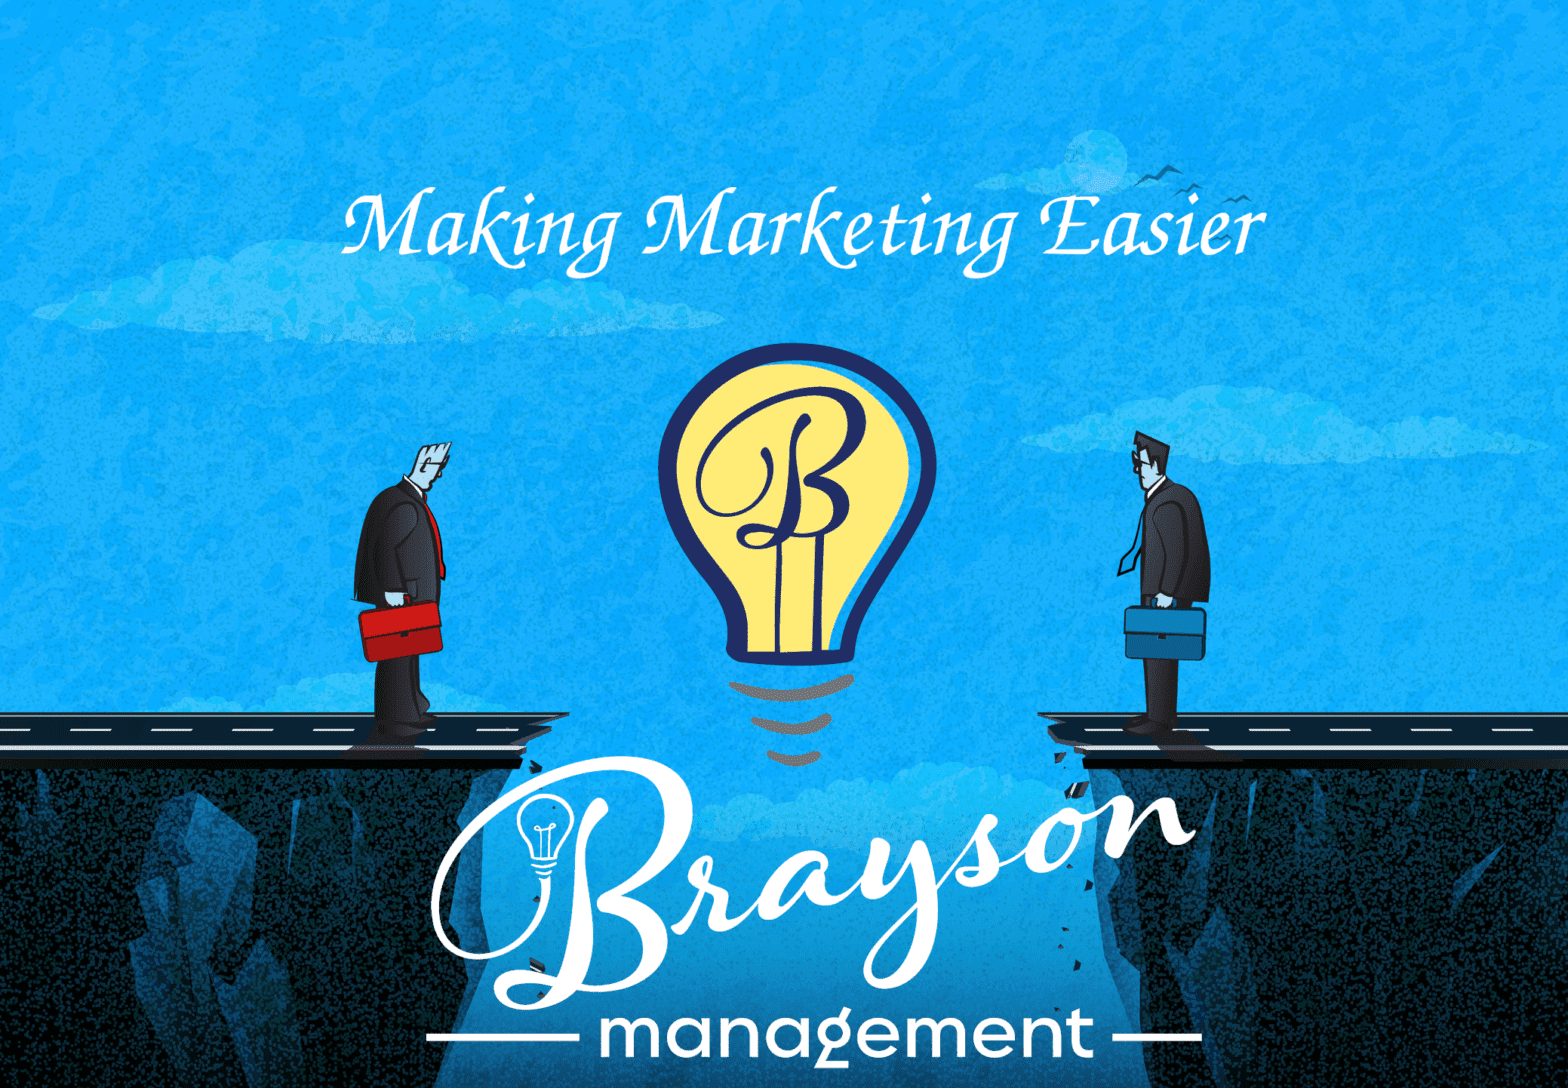 Brayson Management makes things easier.